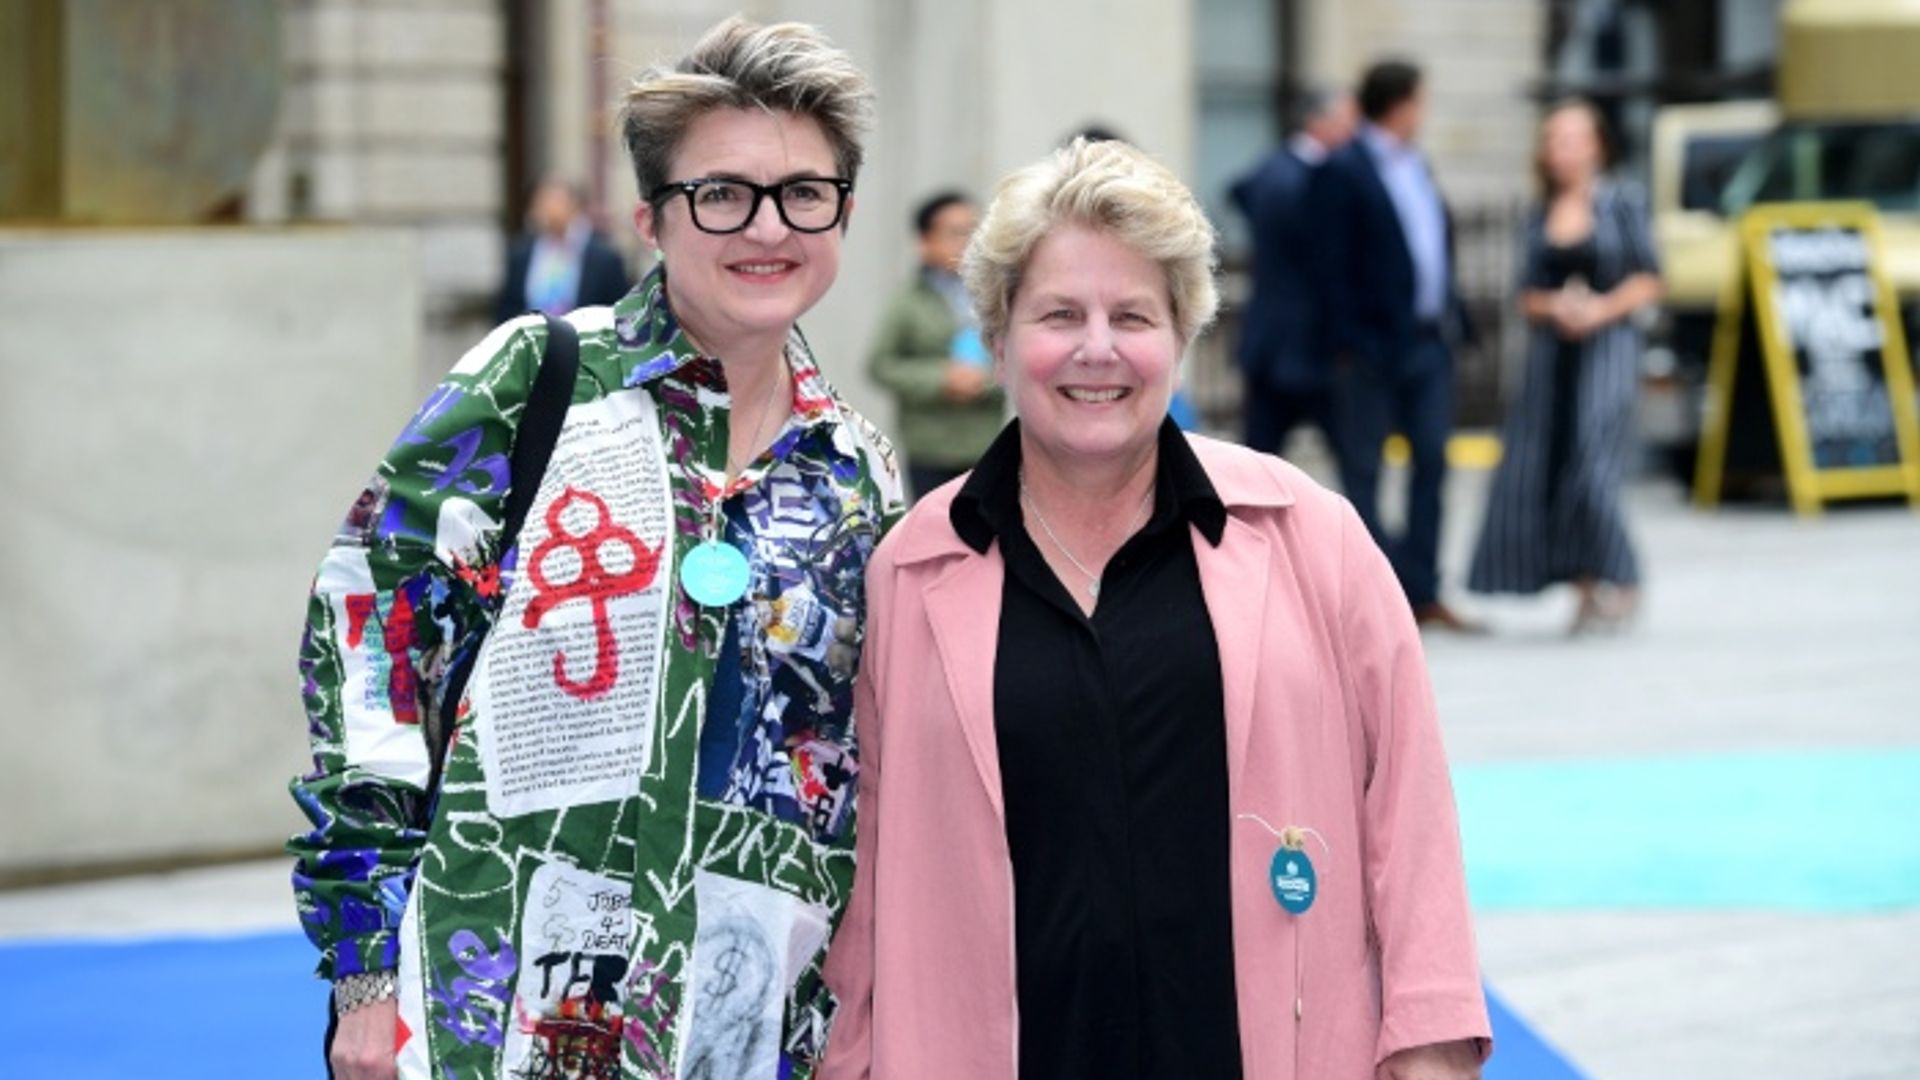 Sandi Toksvig's fabulous living situation with wife Debbie is so unique